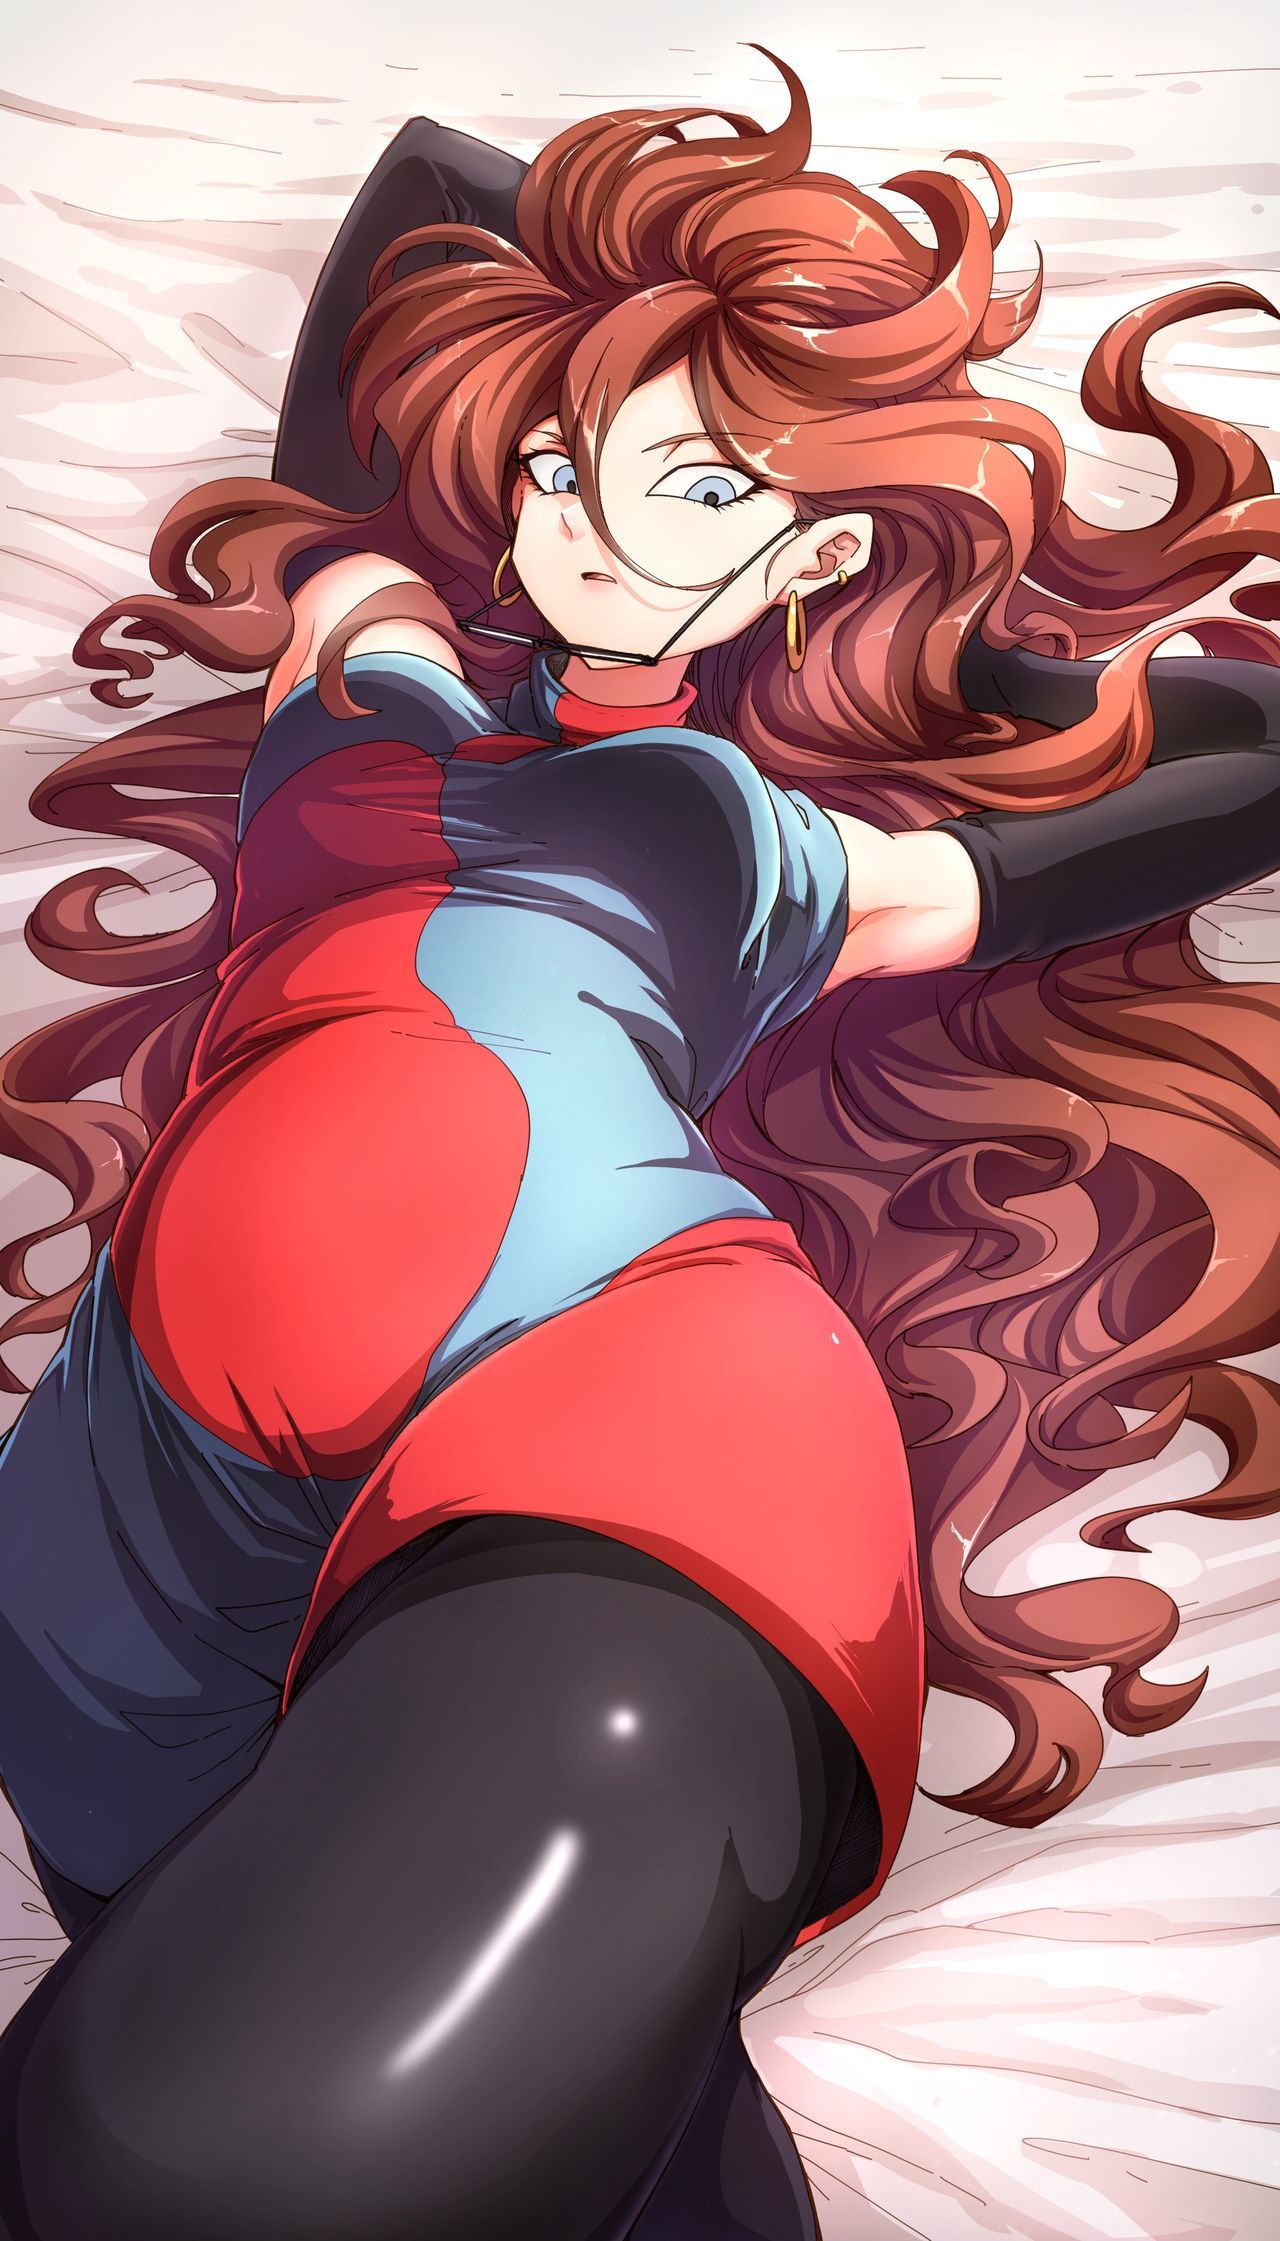 My Favorite Android 21 Pics 25